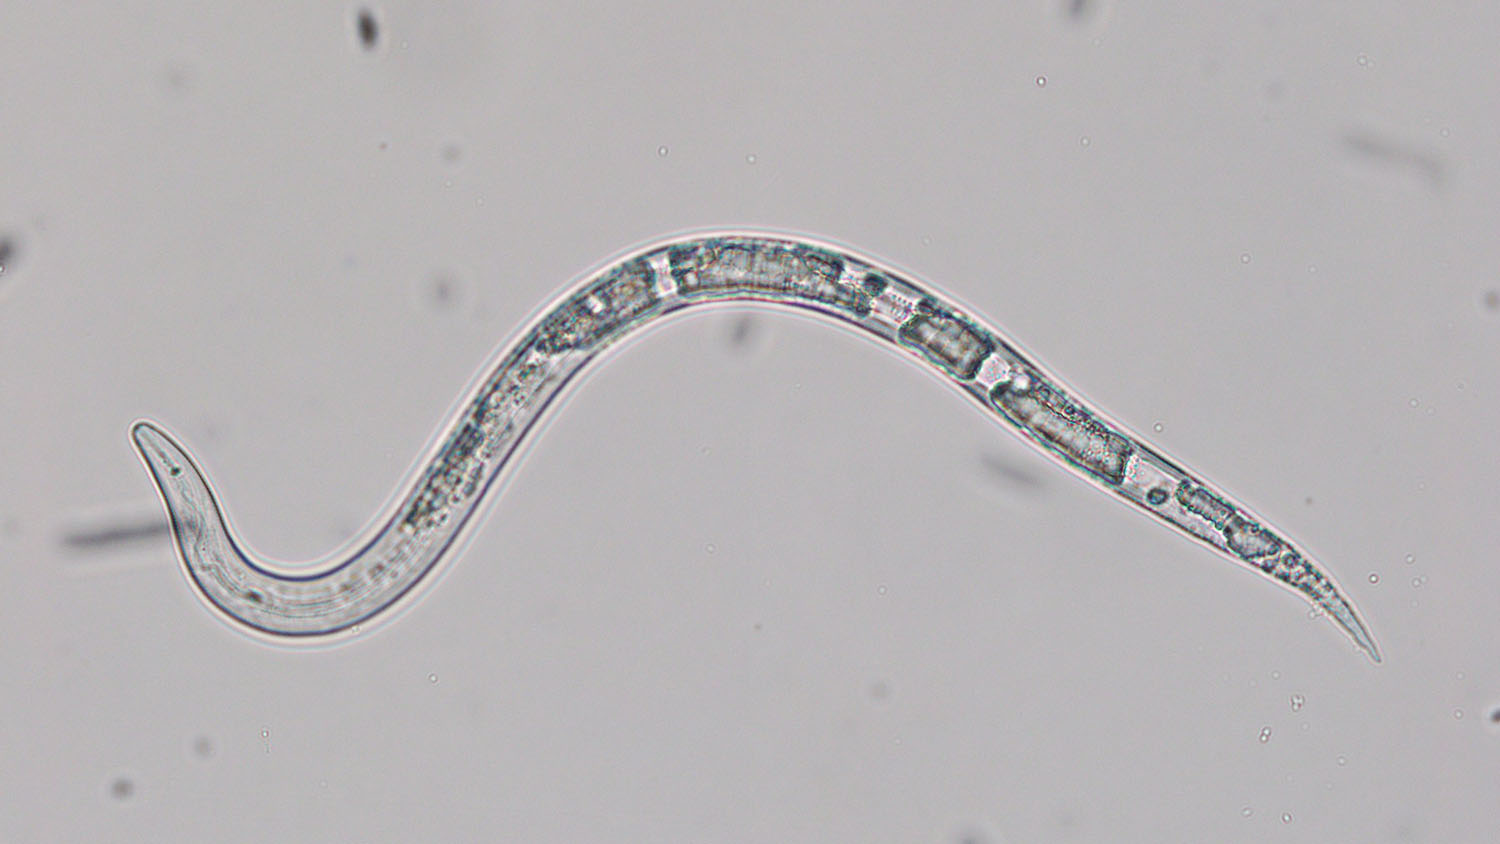 A Northern root-knot nematode under the microscope.